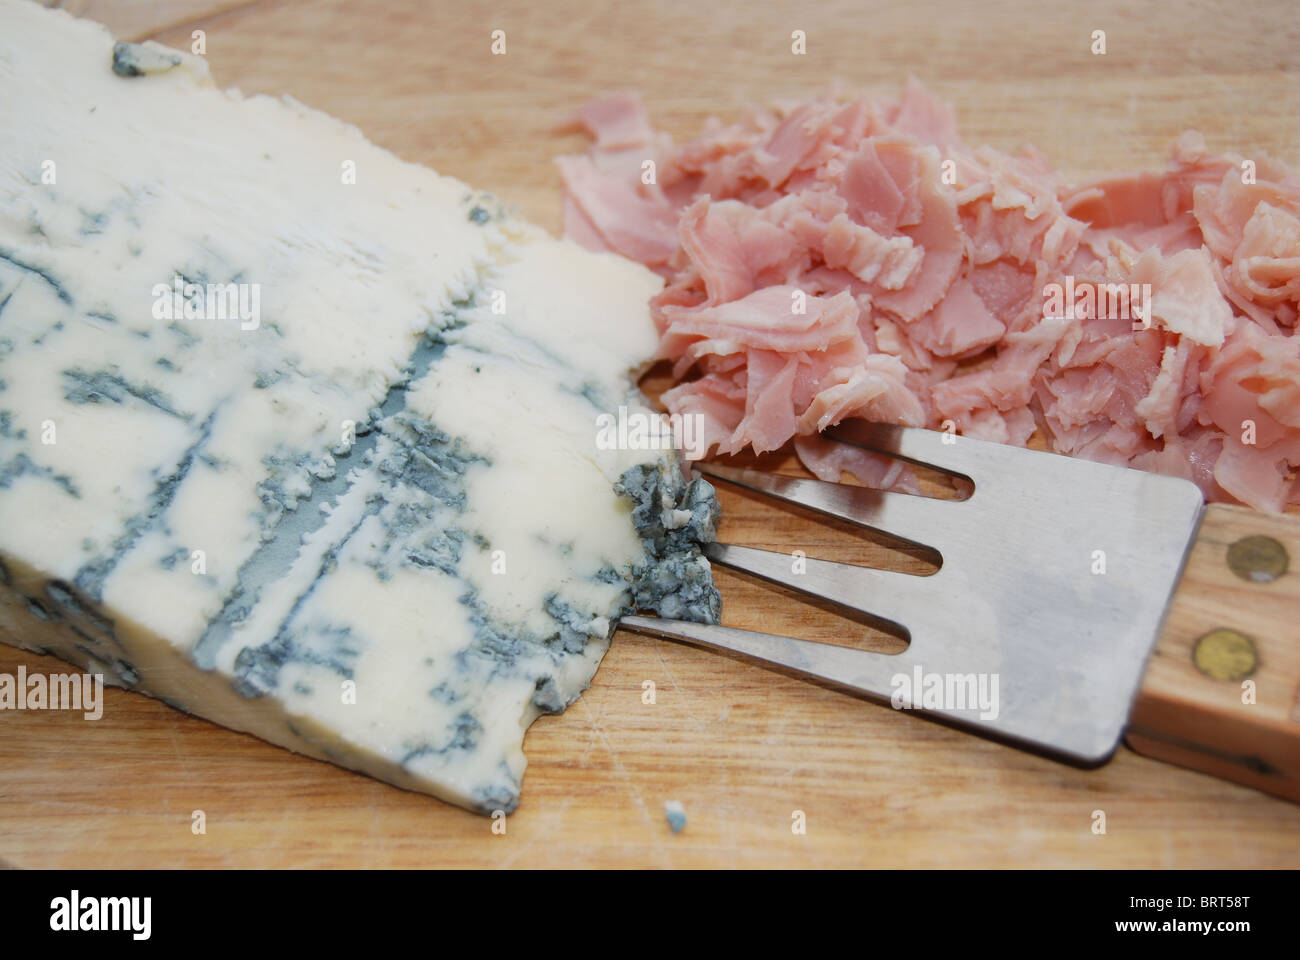 gorgonzola, typical aromatic italian cheese, and cooked ham Stock Photo